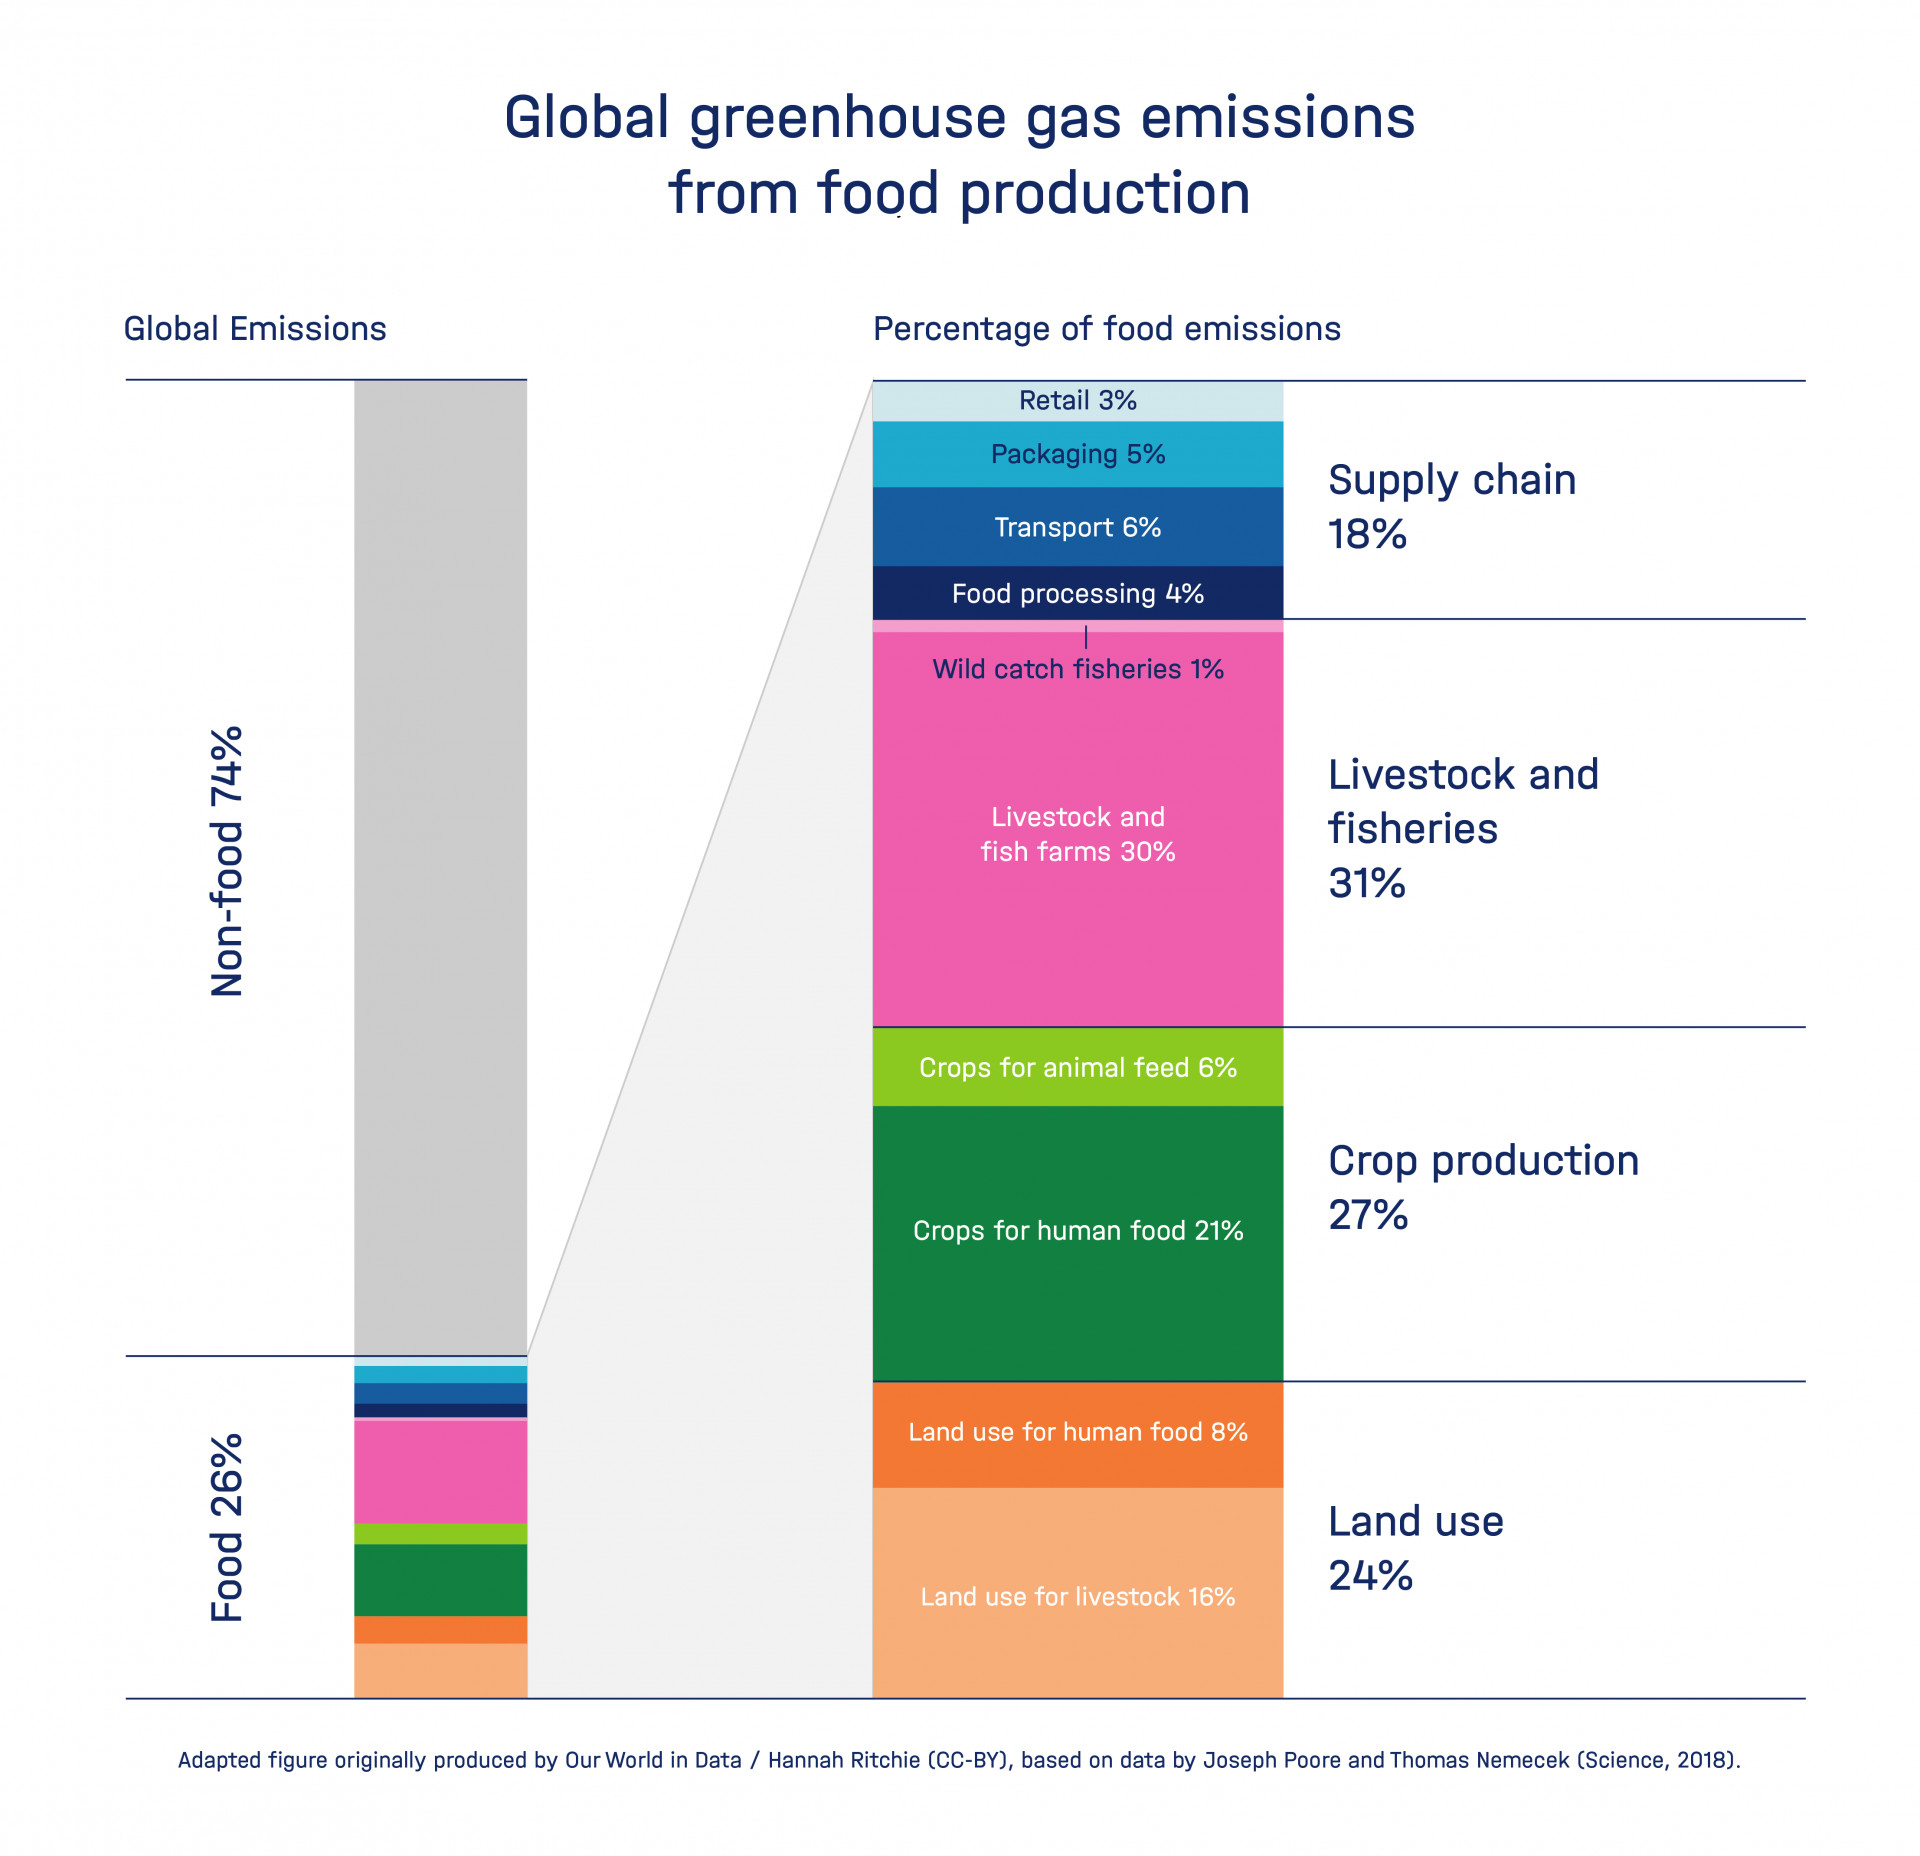 An illustration showing the global greenhouse gas emissions from food production